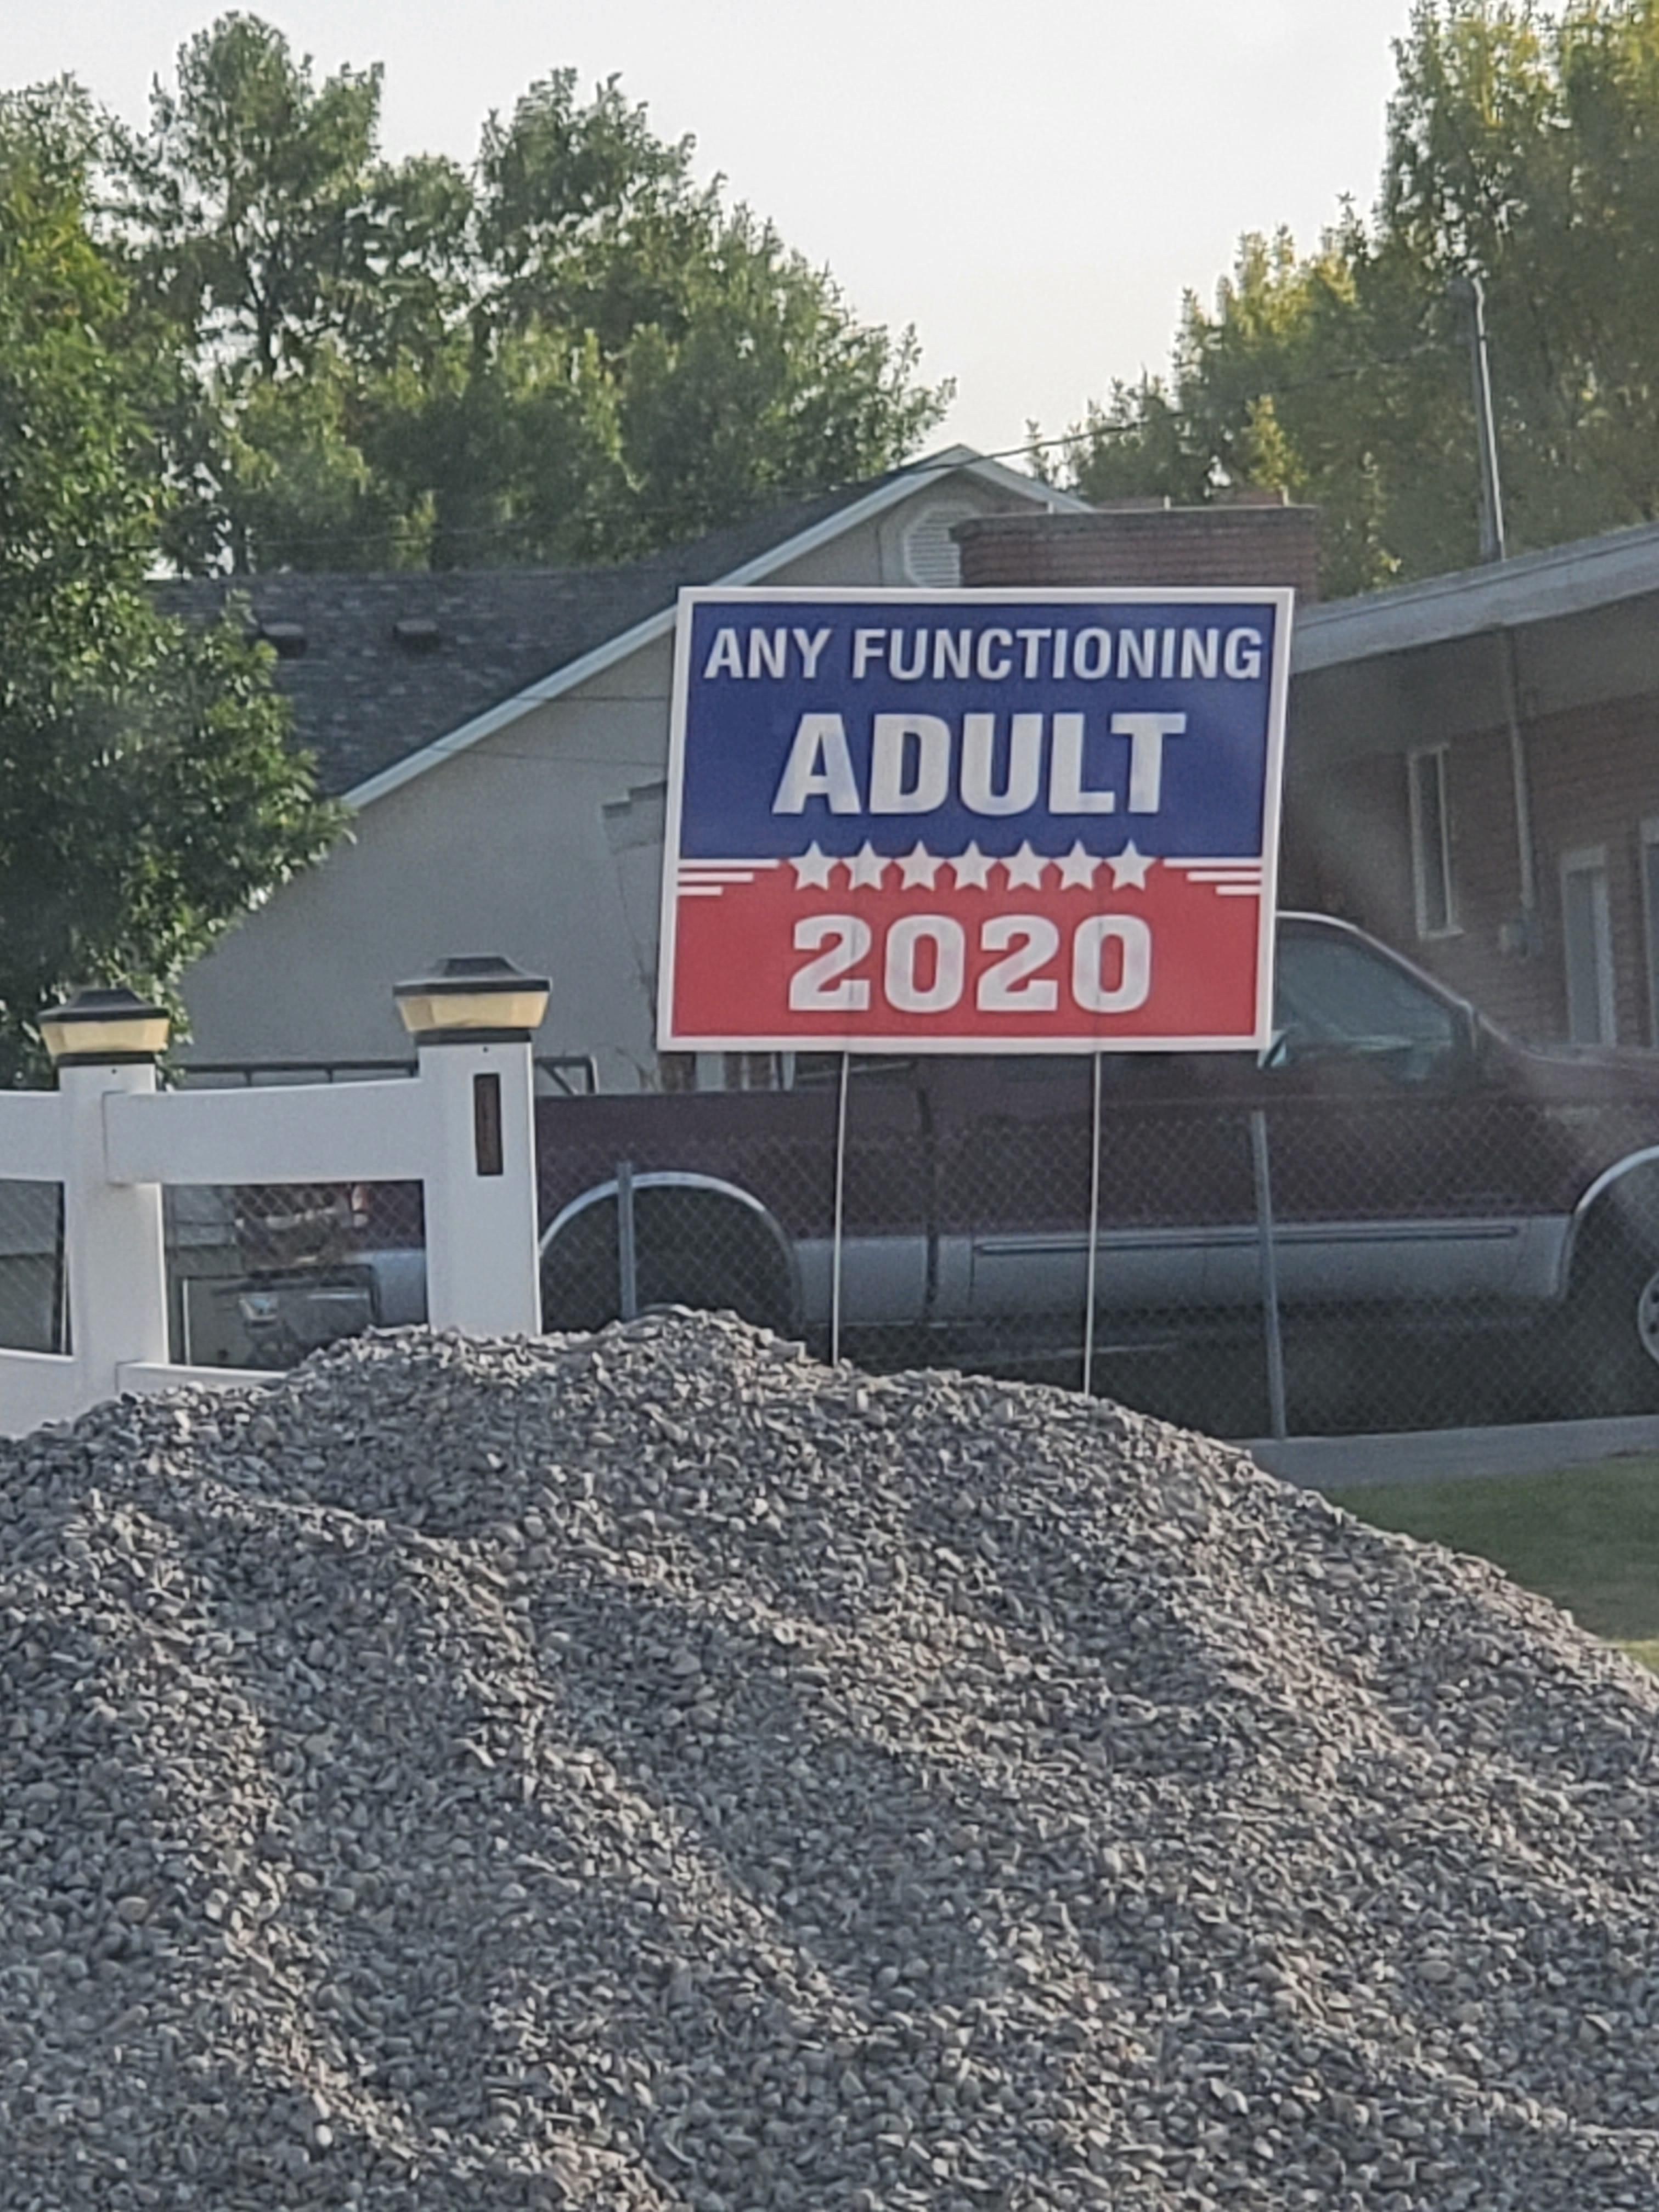 I found this on my drive home today